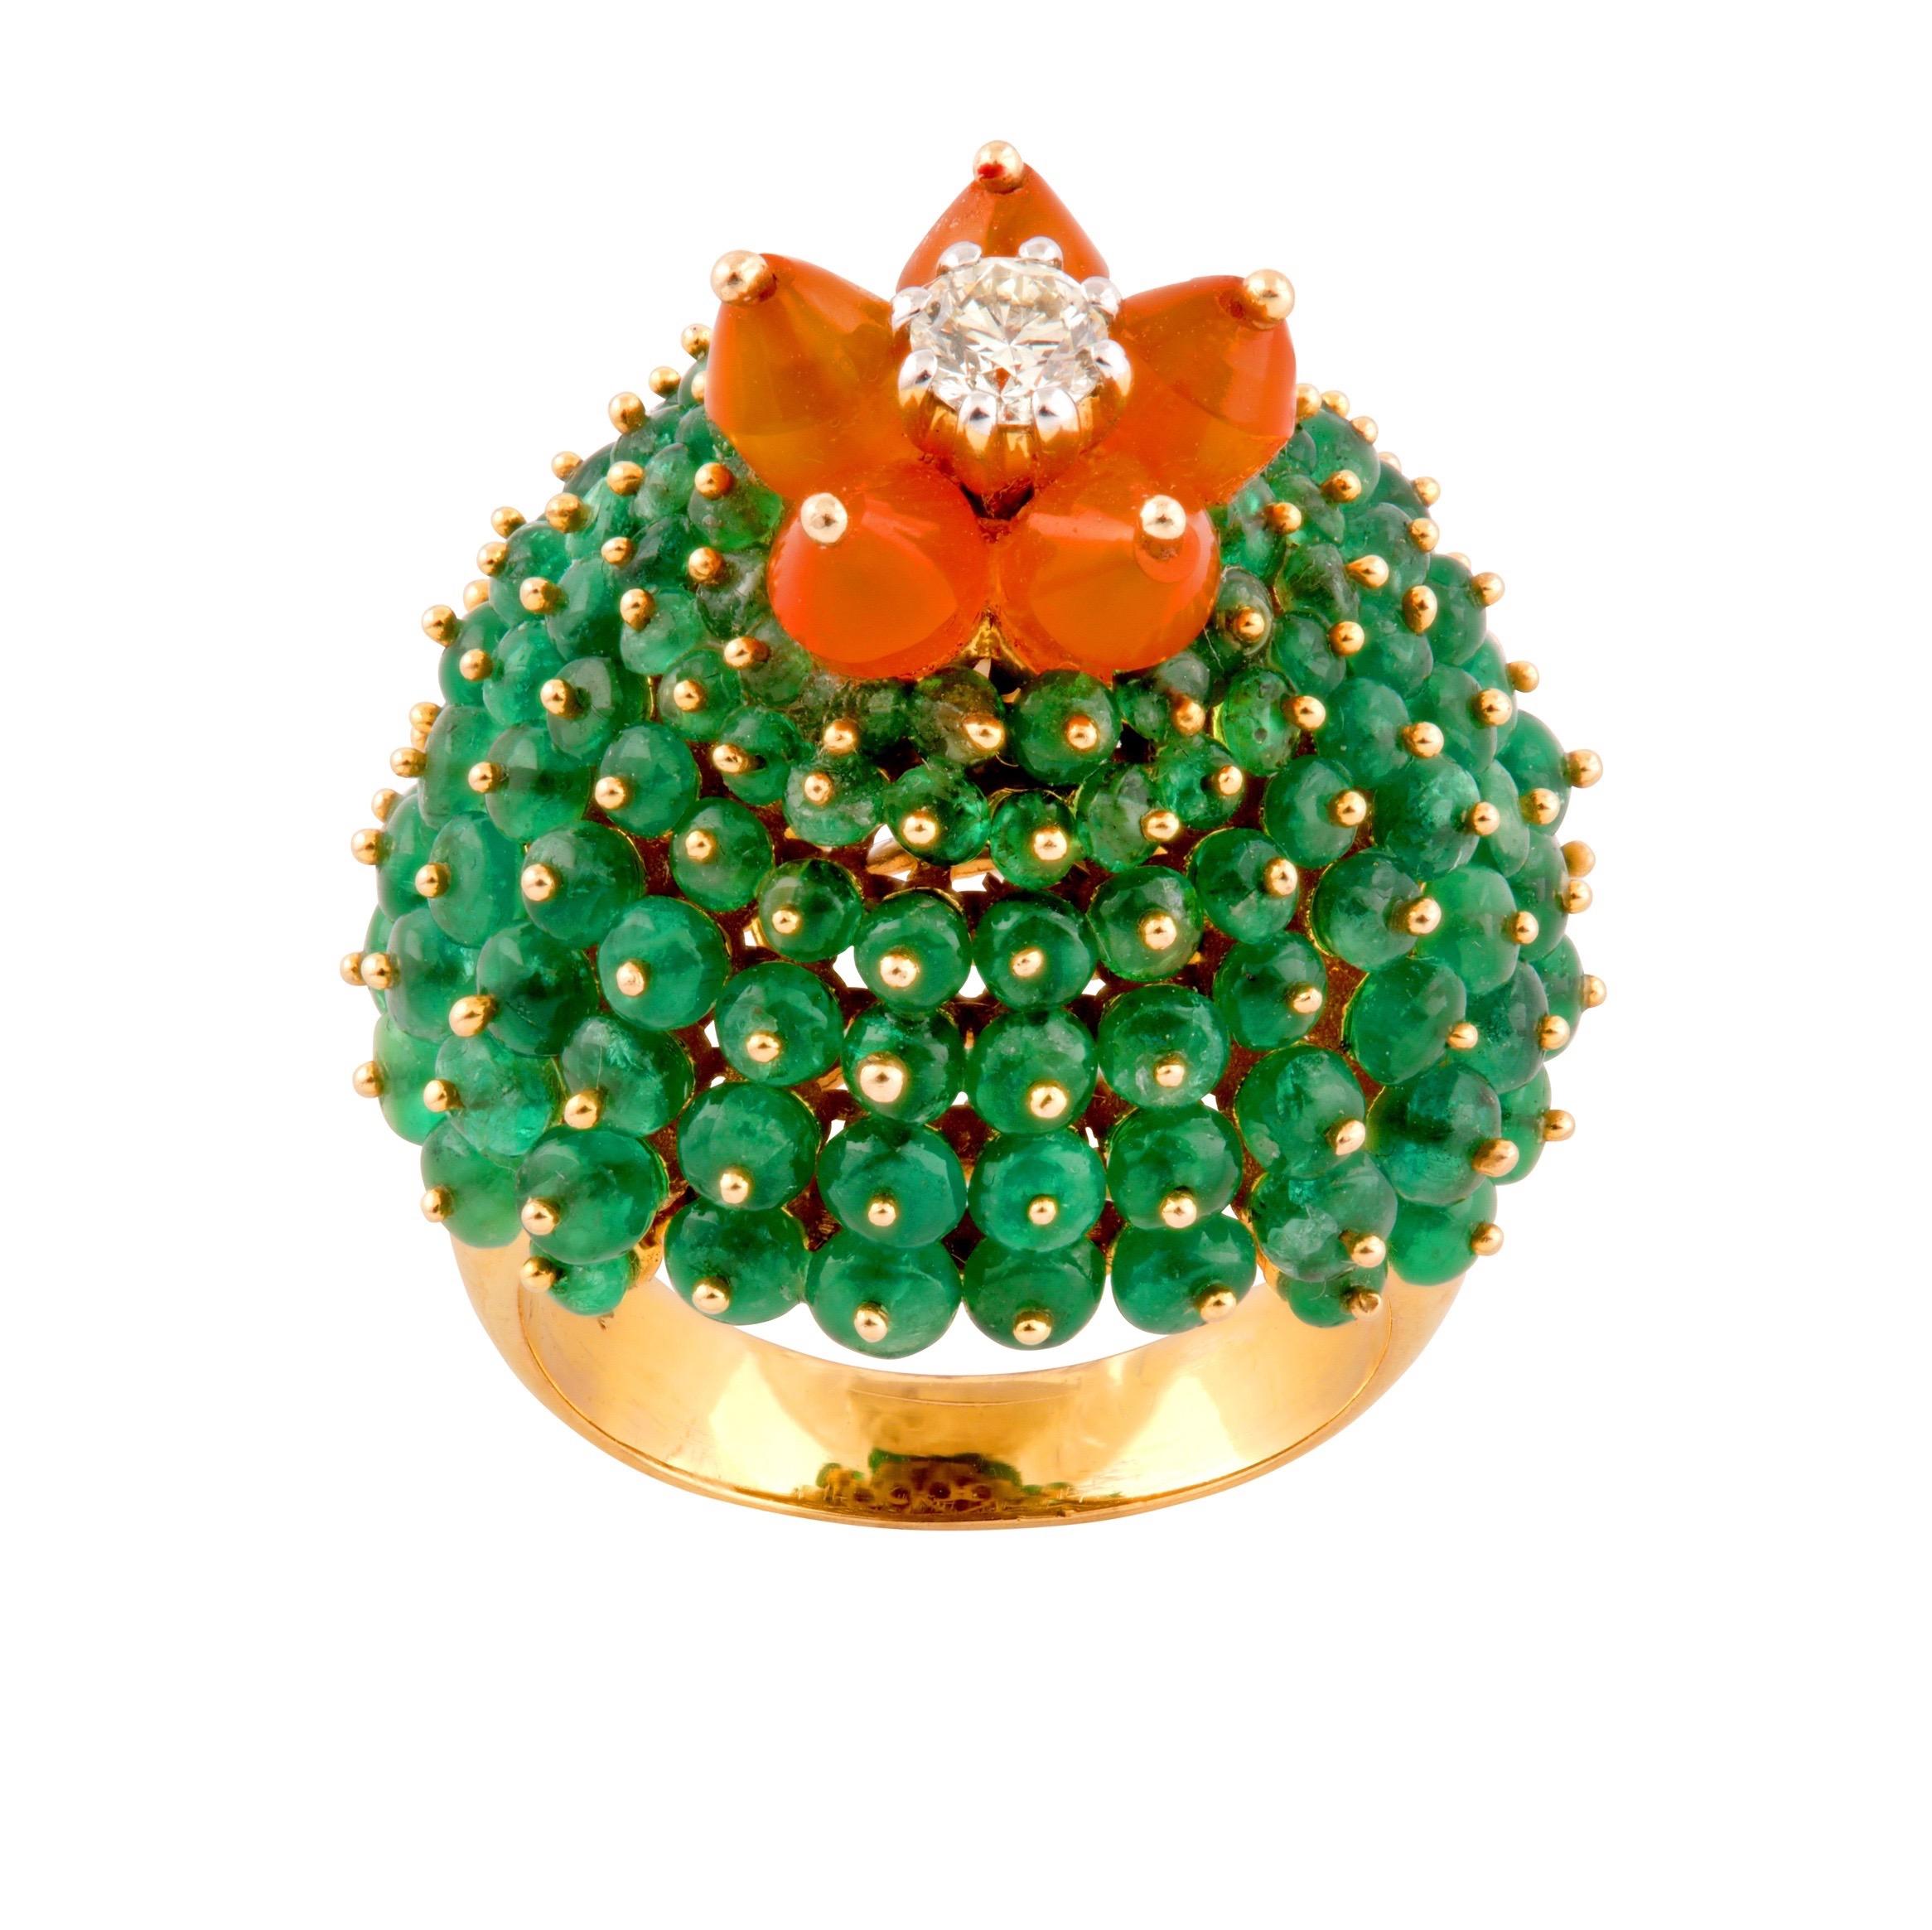 Vintage Emerald Fire Opal Diamond Bombe Cactus Cocktail Ring Yellow Gold 1990s 6